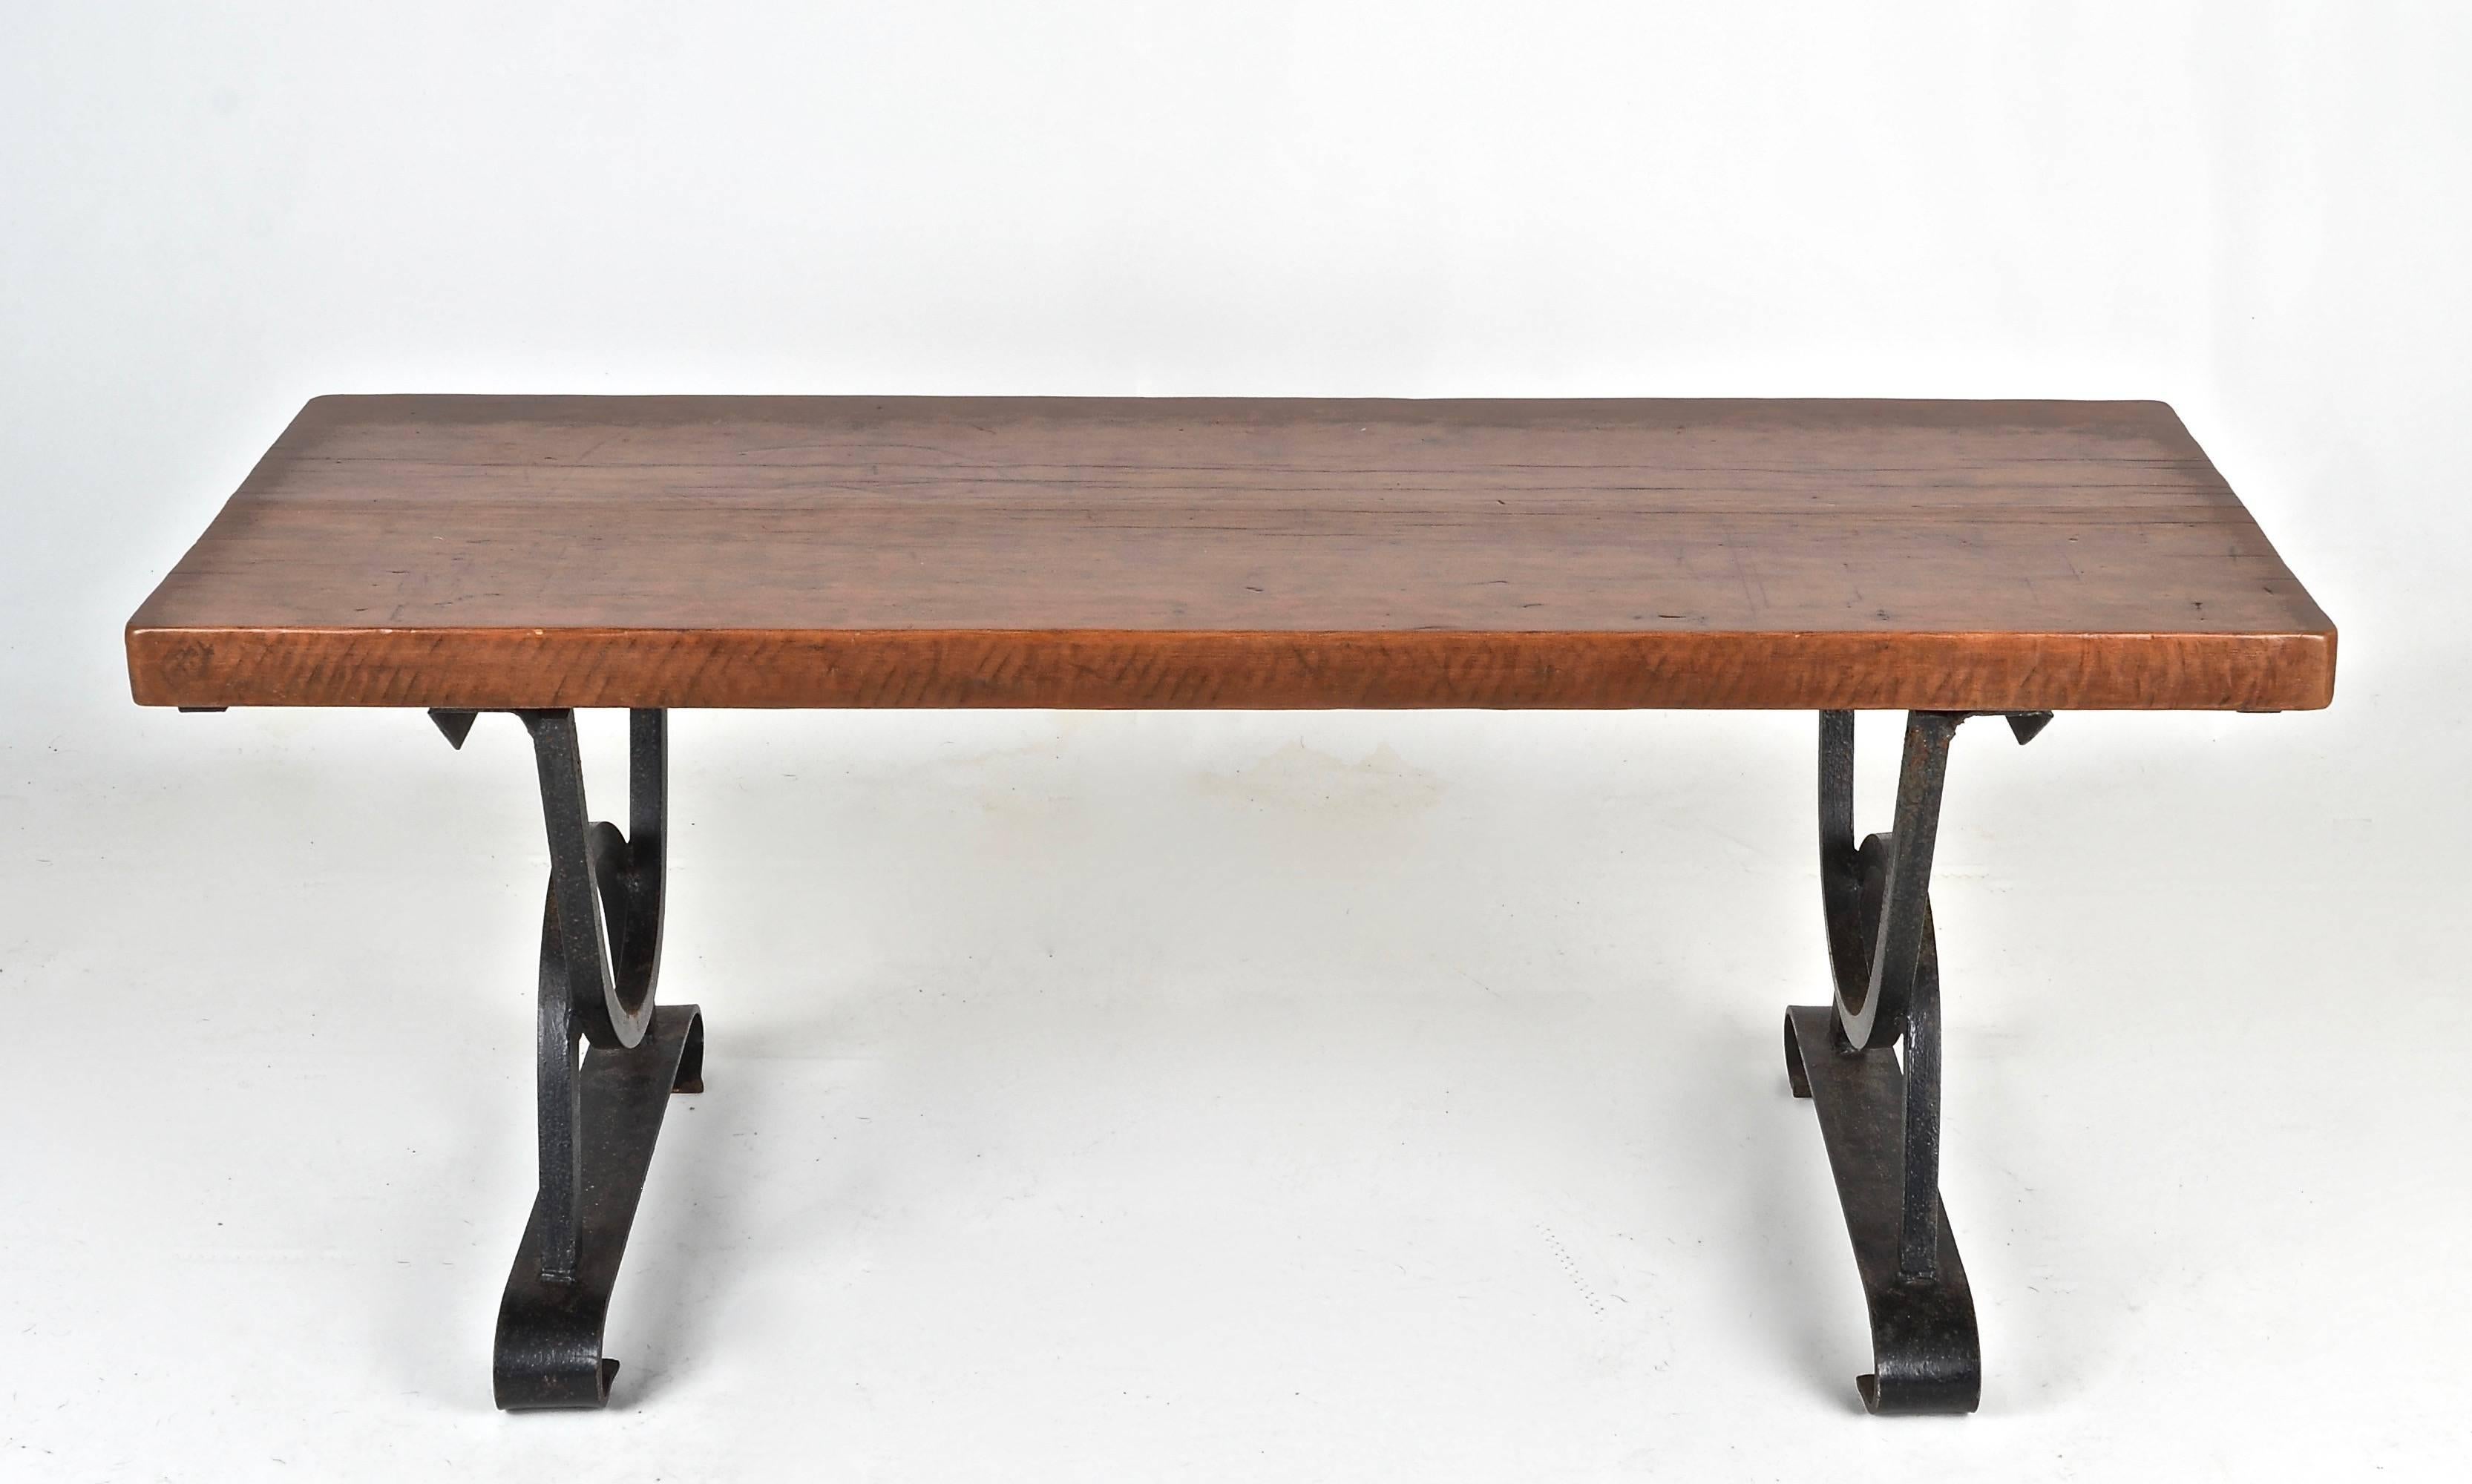 Super fine quality bench or table, made in France, circa 1960s. Heavy iron base with thick oak top. Lovely patina and color.